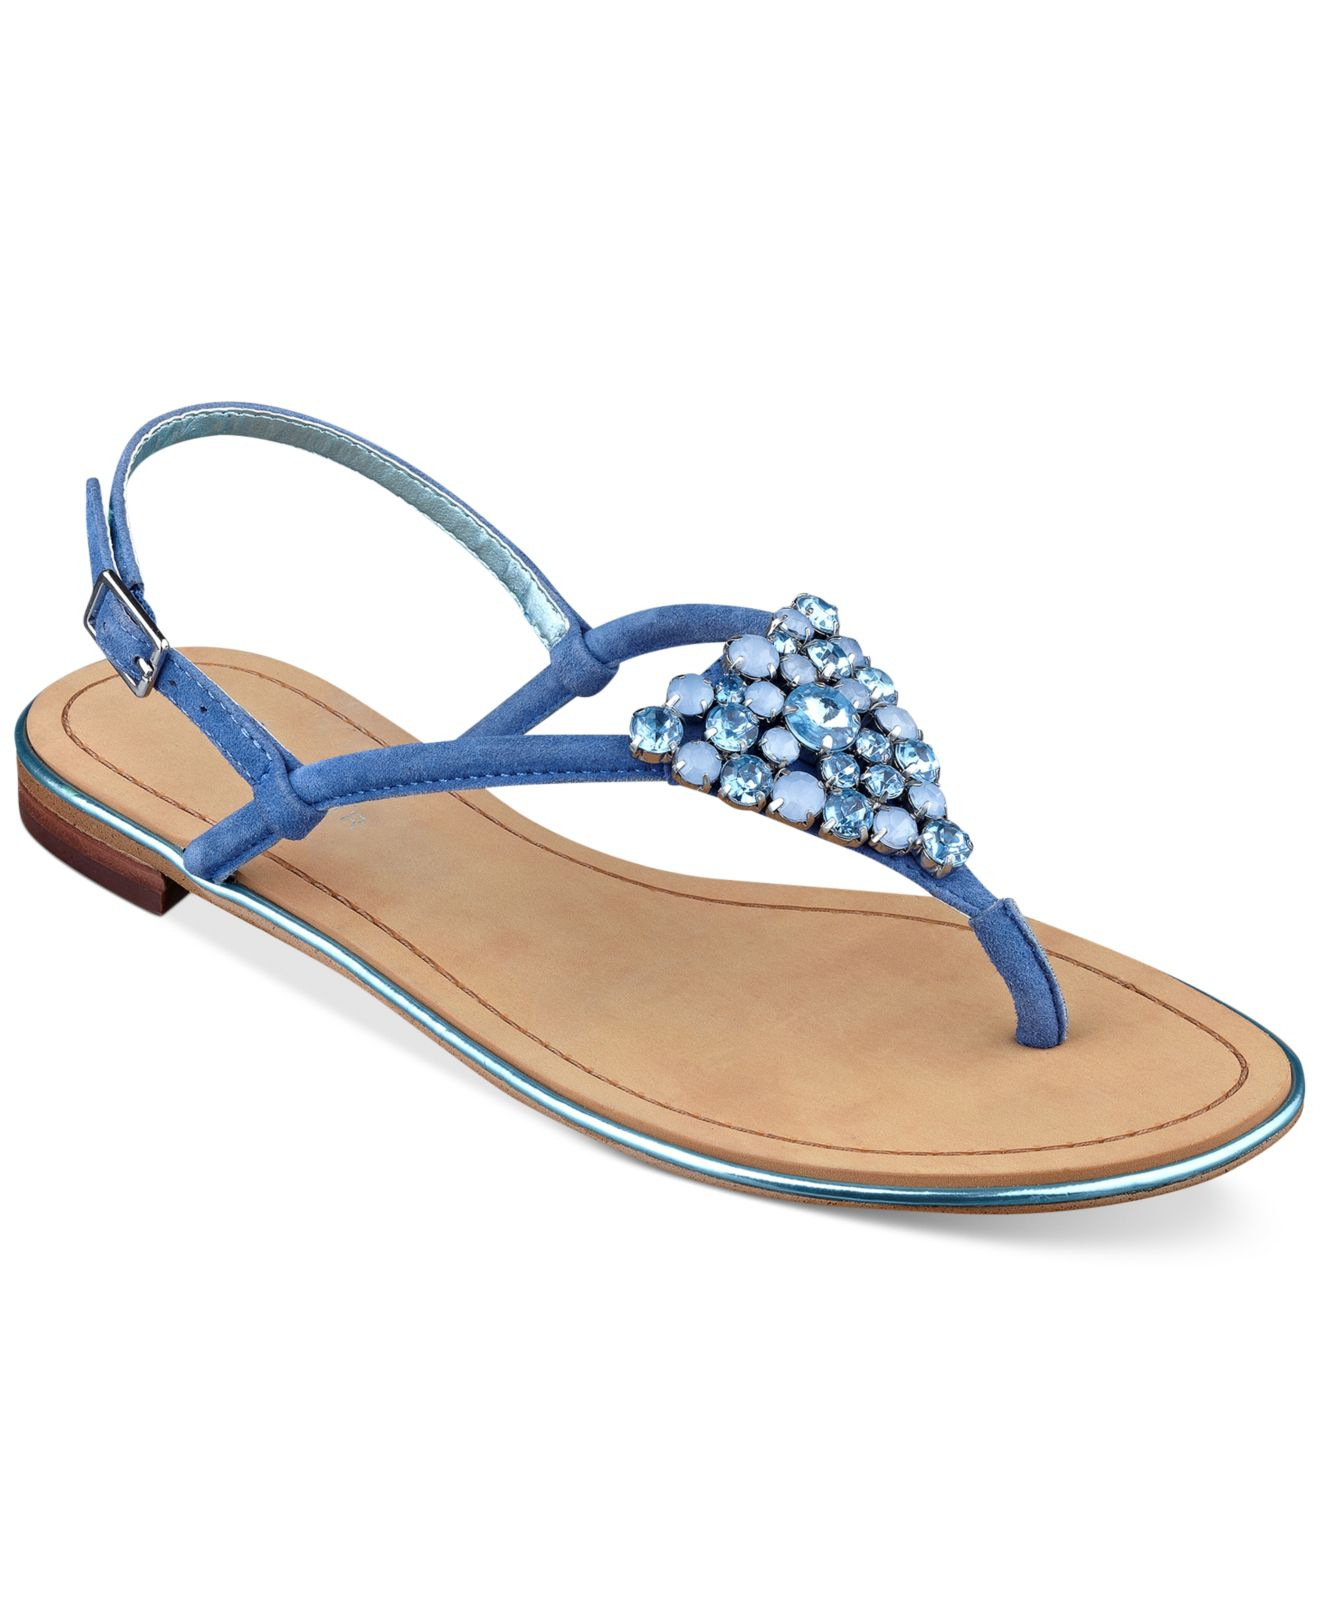 Marc fisher Rady Thong Sandals in Blue (Blue )